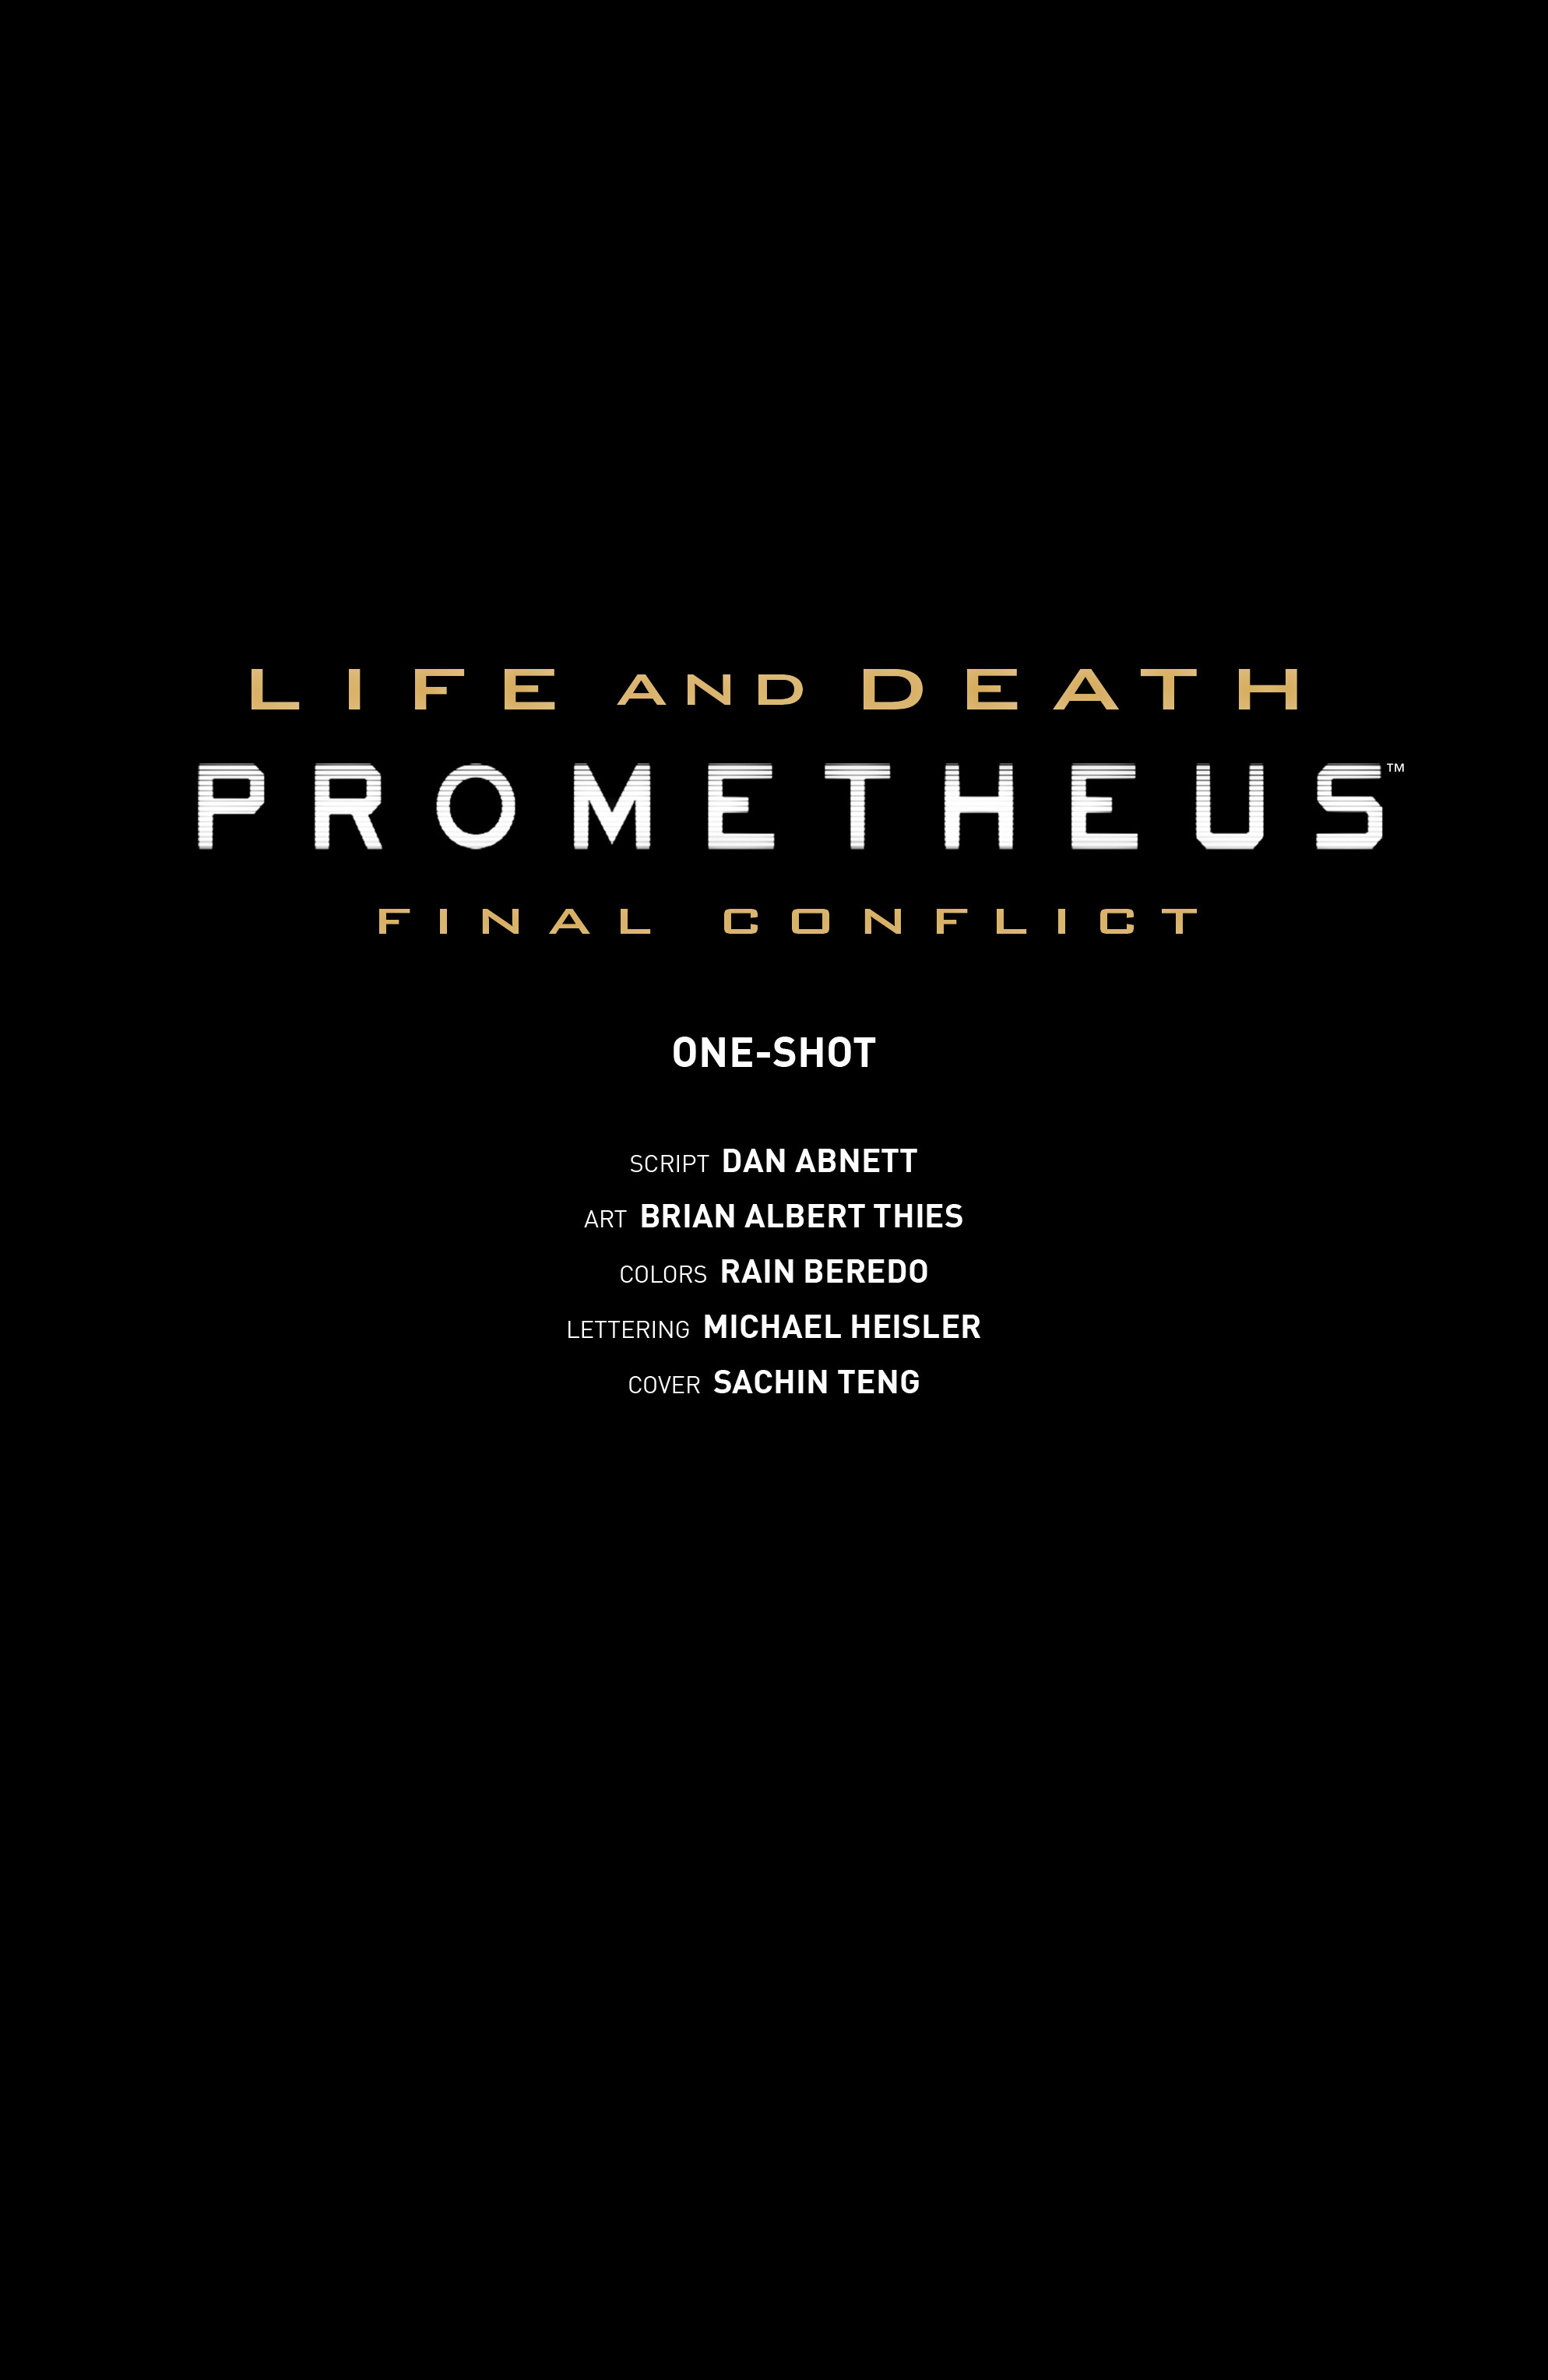 Read online Prometheus: Life And Death One-Shot comic -  Issue # Full - 44